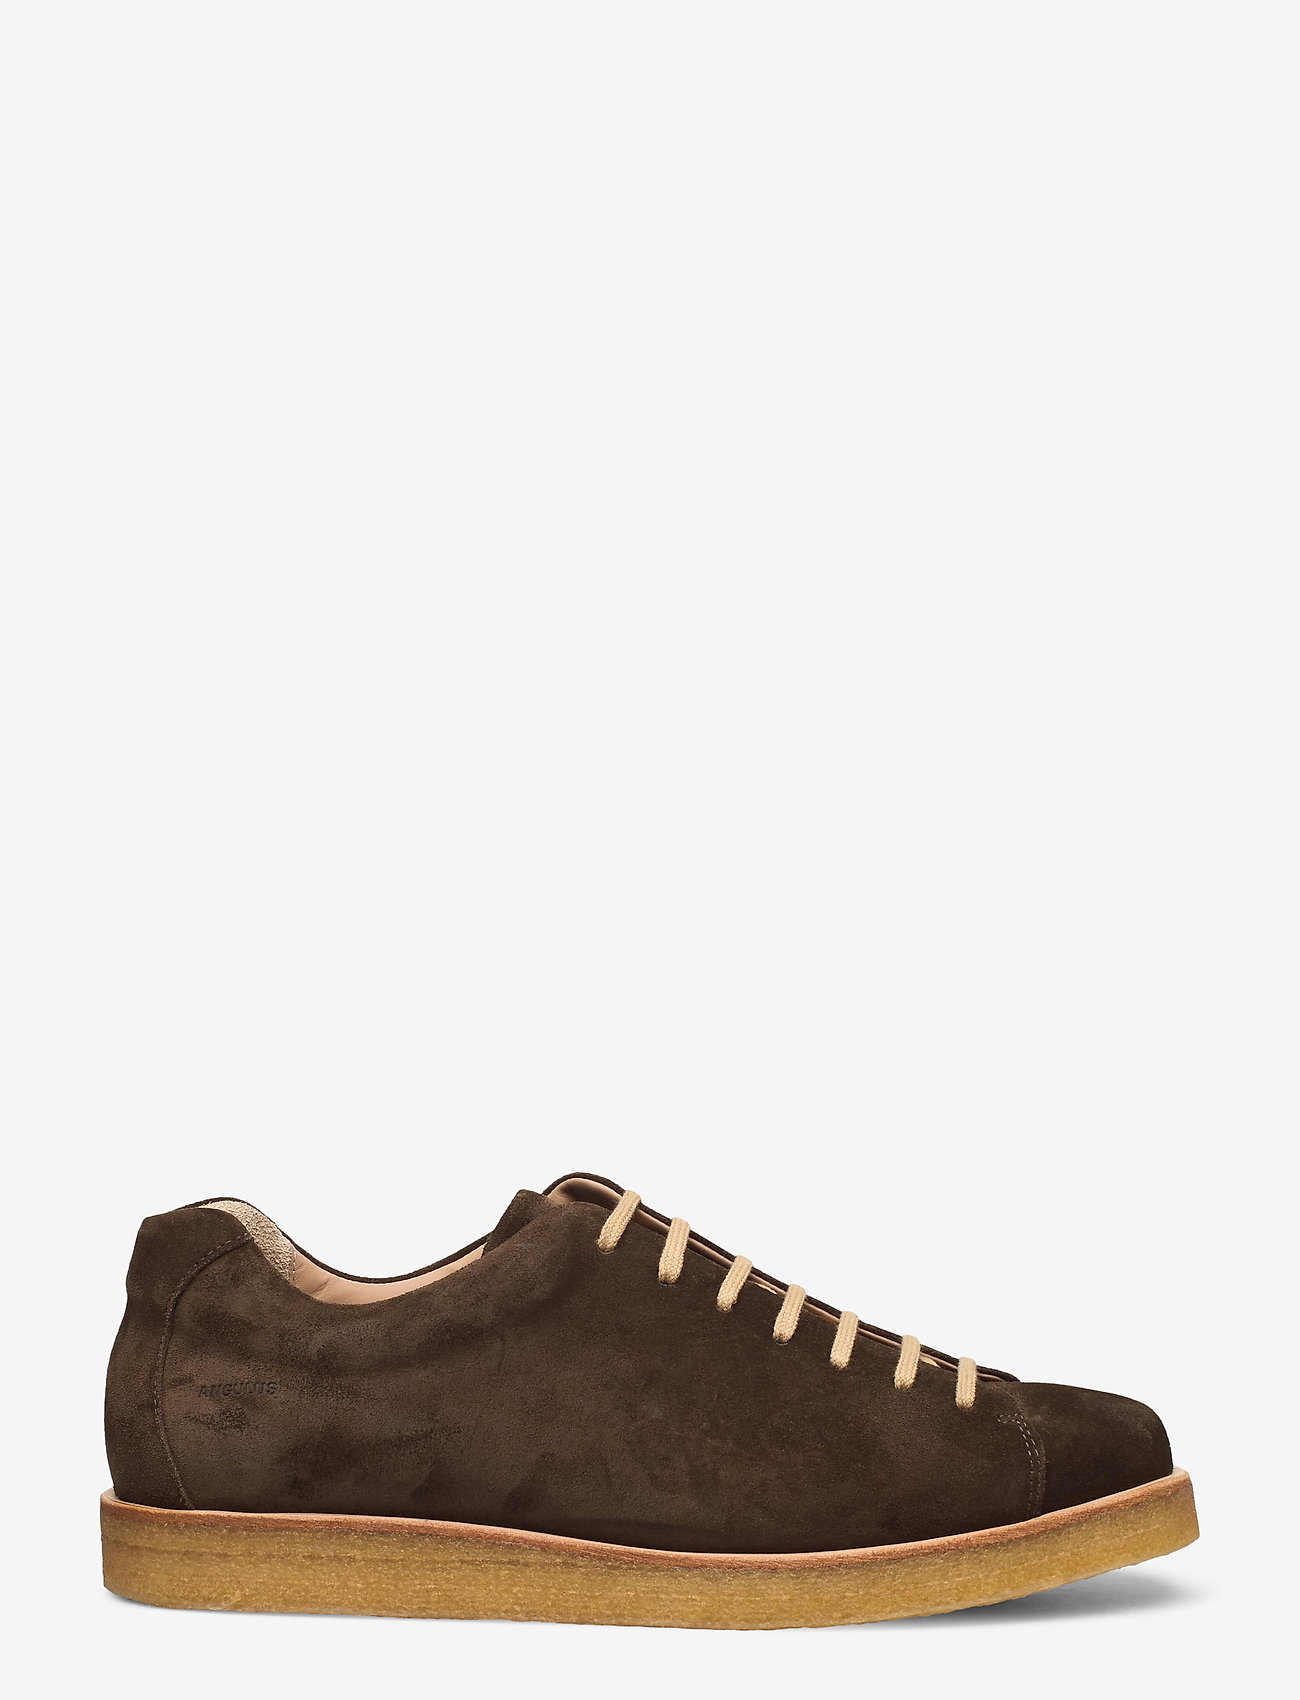 ANGULUS - Shoes - flat - with lace - lave sneakers - 2214 dark olive - 1